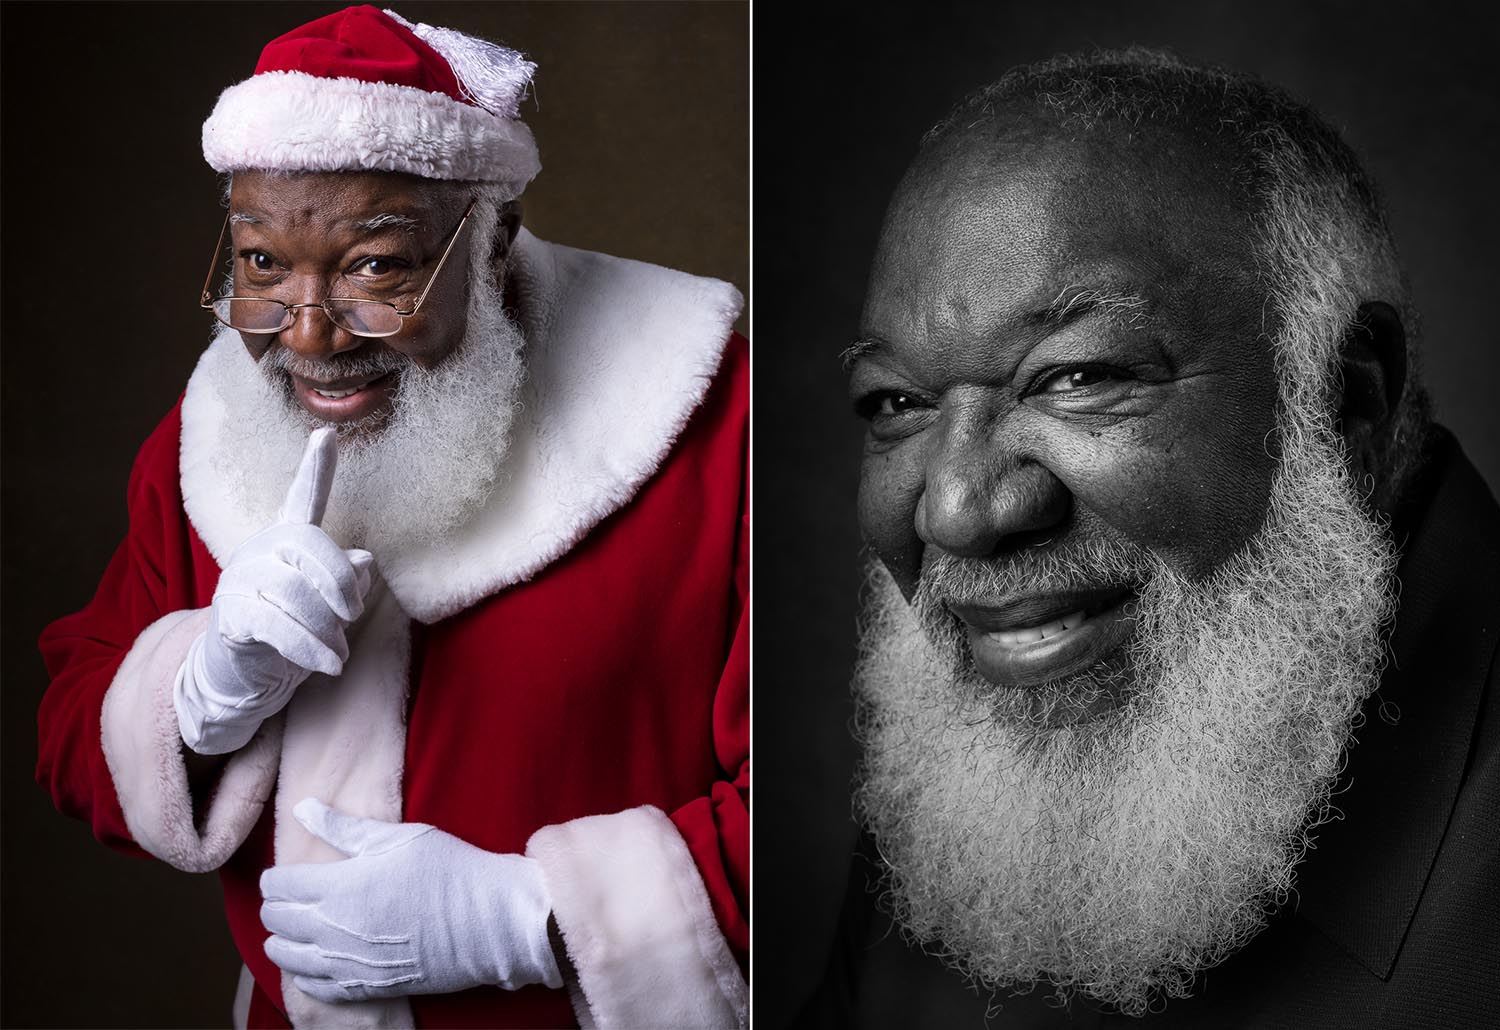 James Nuckles, from Atlanta, Ga. is one of the relatively few African-American Santas, according to Cooper. Nuckles told Cooper that both white and Black children have asserted that he's not the real Santa Claus because he's not white. Nuckles responds by asking them, "What color is Santa? How do you know?" He usually tells these naysayers about the historical Saint Nicholas, who is often depicted as dark-skinned.